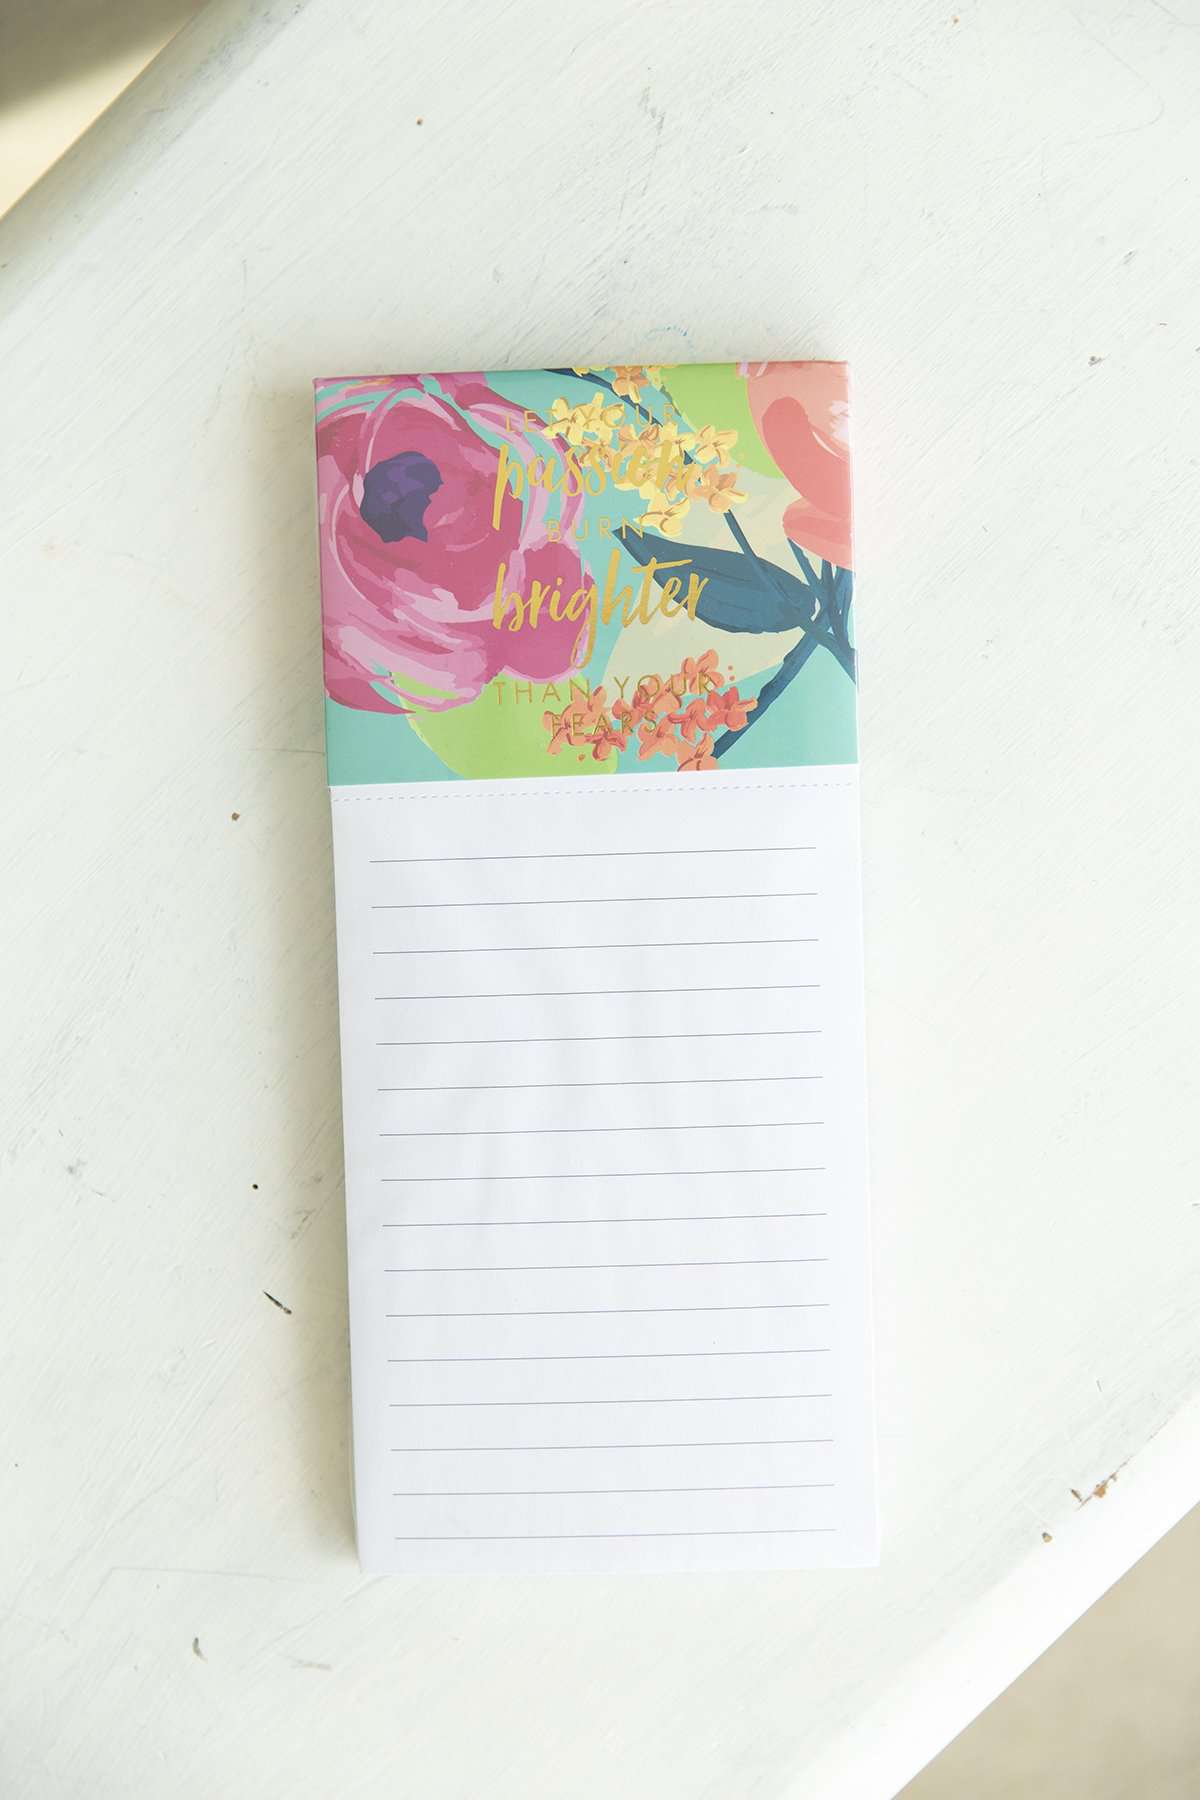 Brighter Than Your Fears Pink Floral Magnetic Notepad